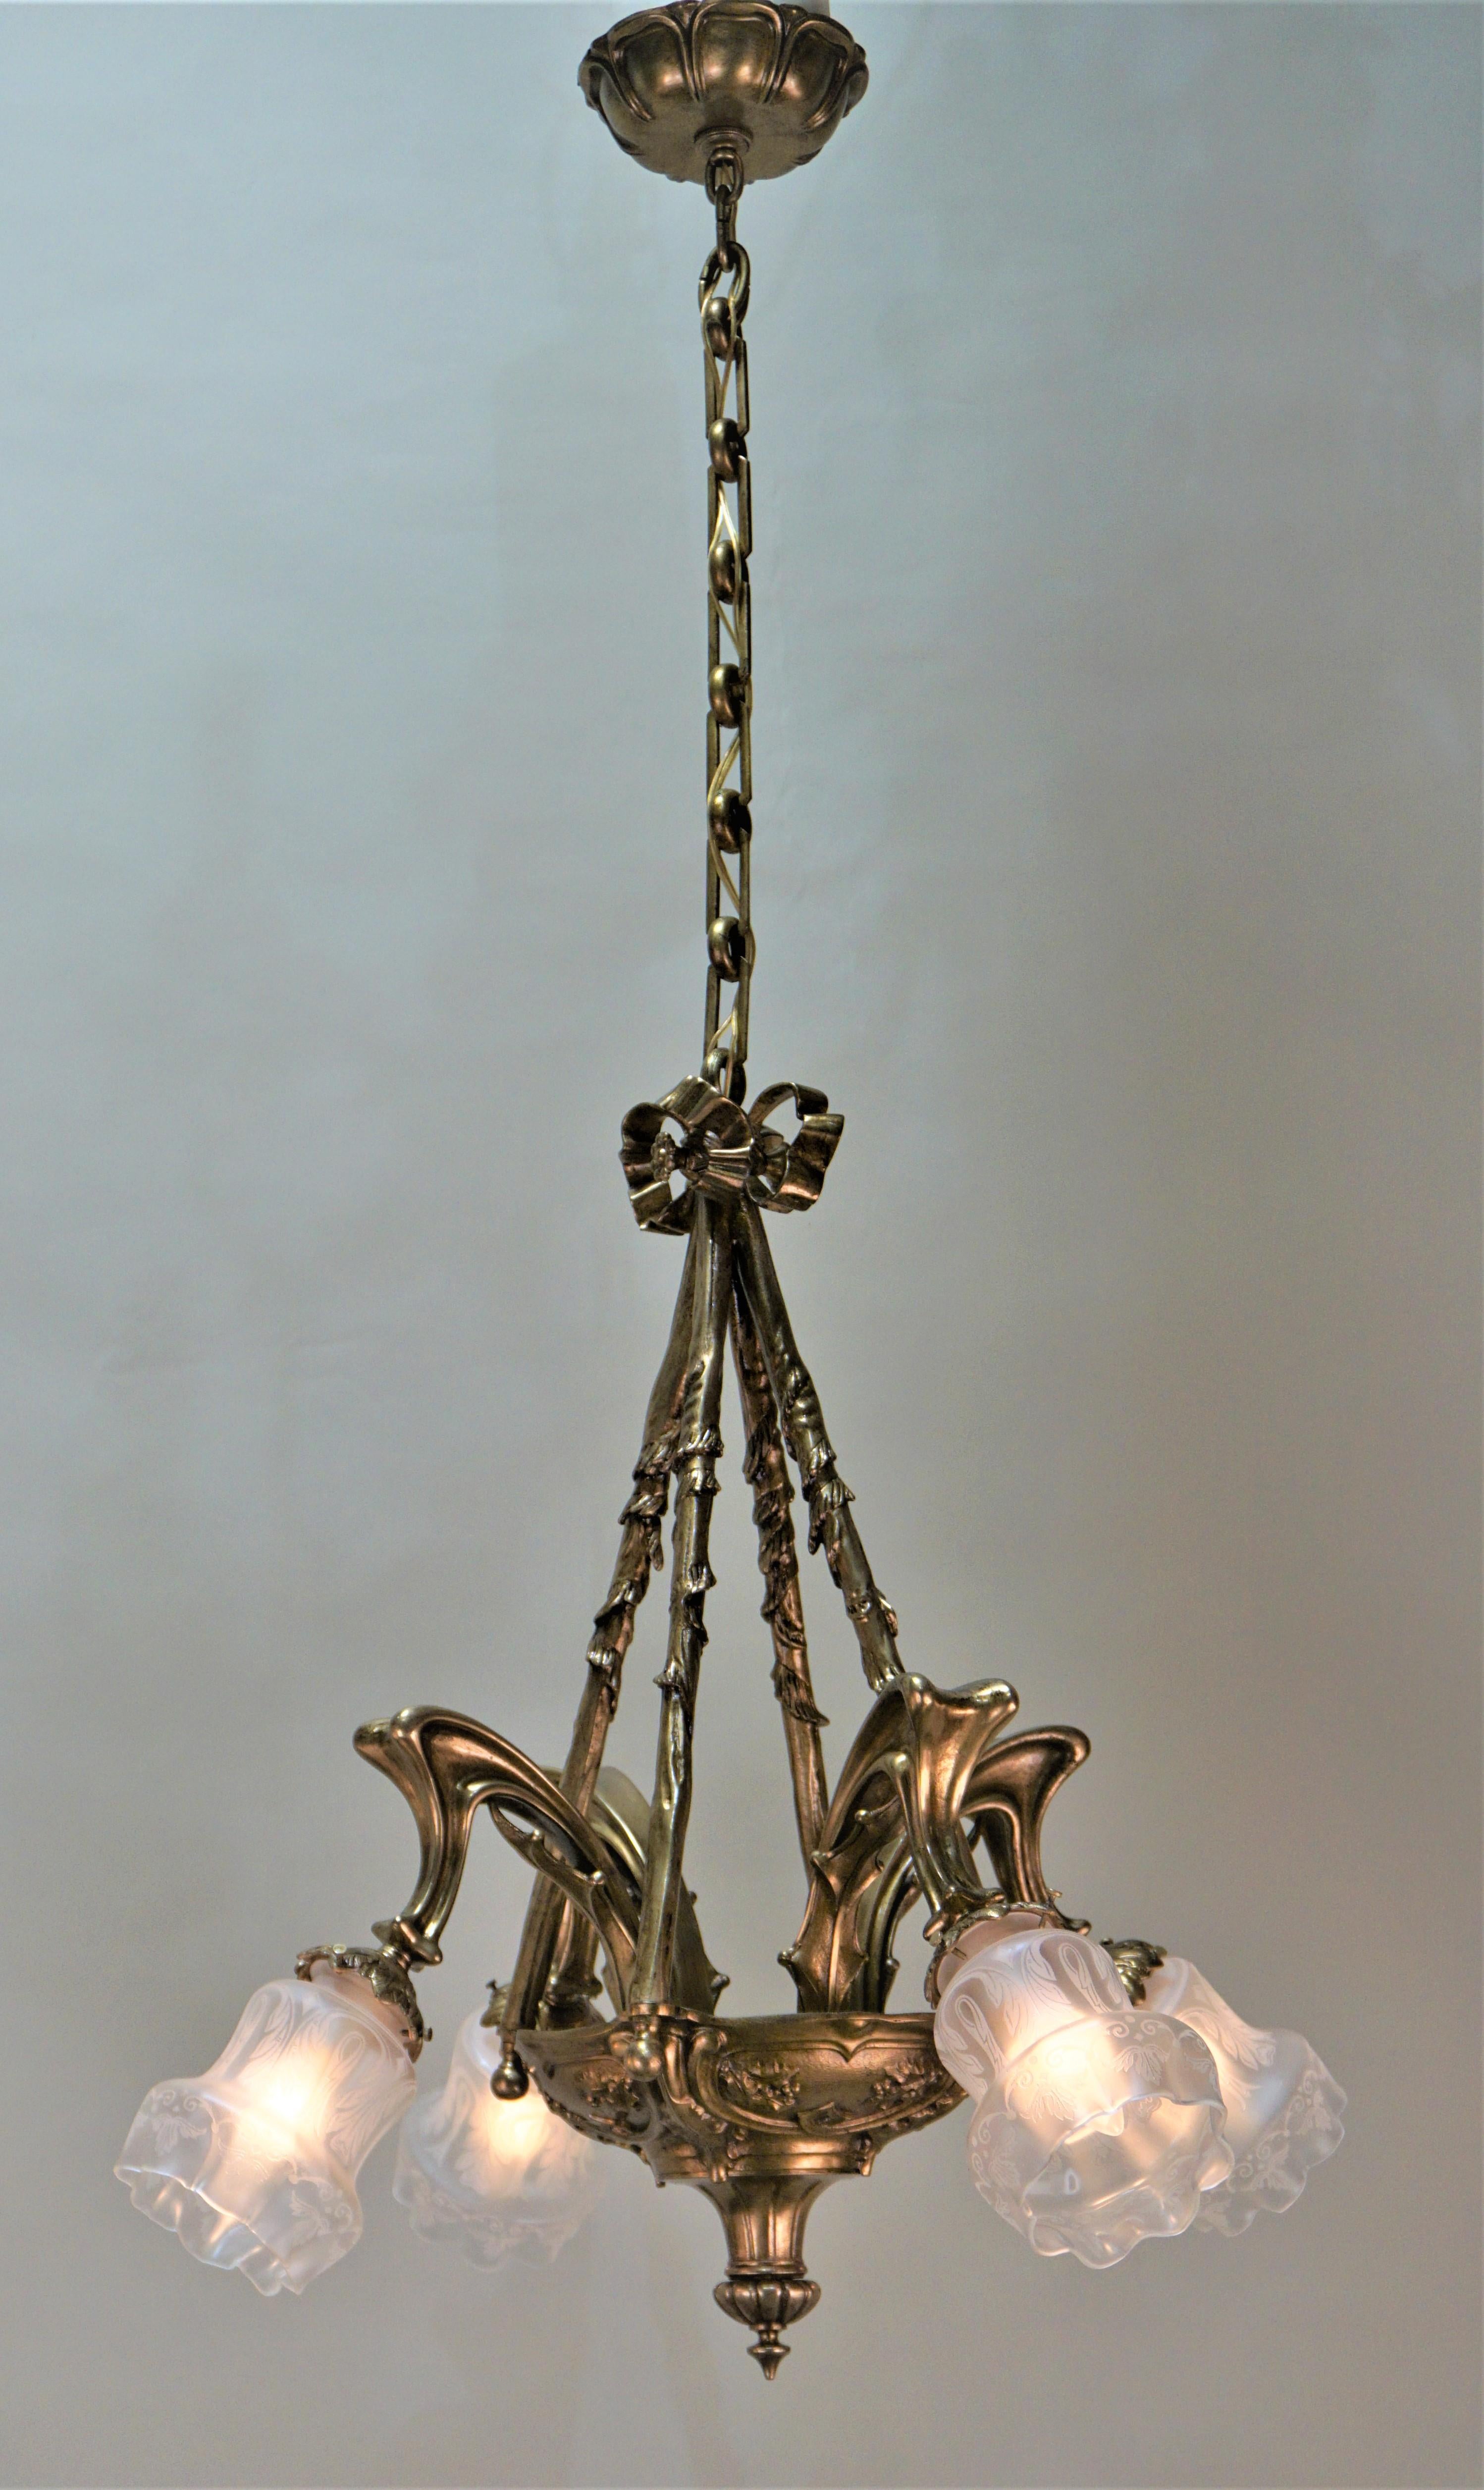 Early 20th century four-light bronze chandelier with etched glass shades.
Total height with all the chain is 44.5